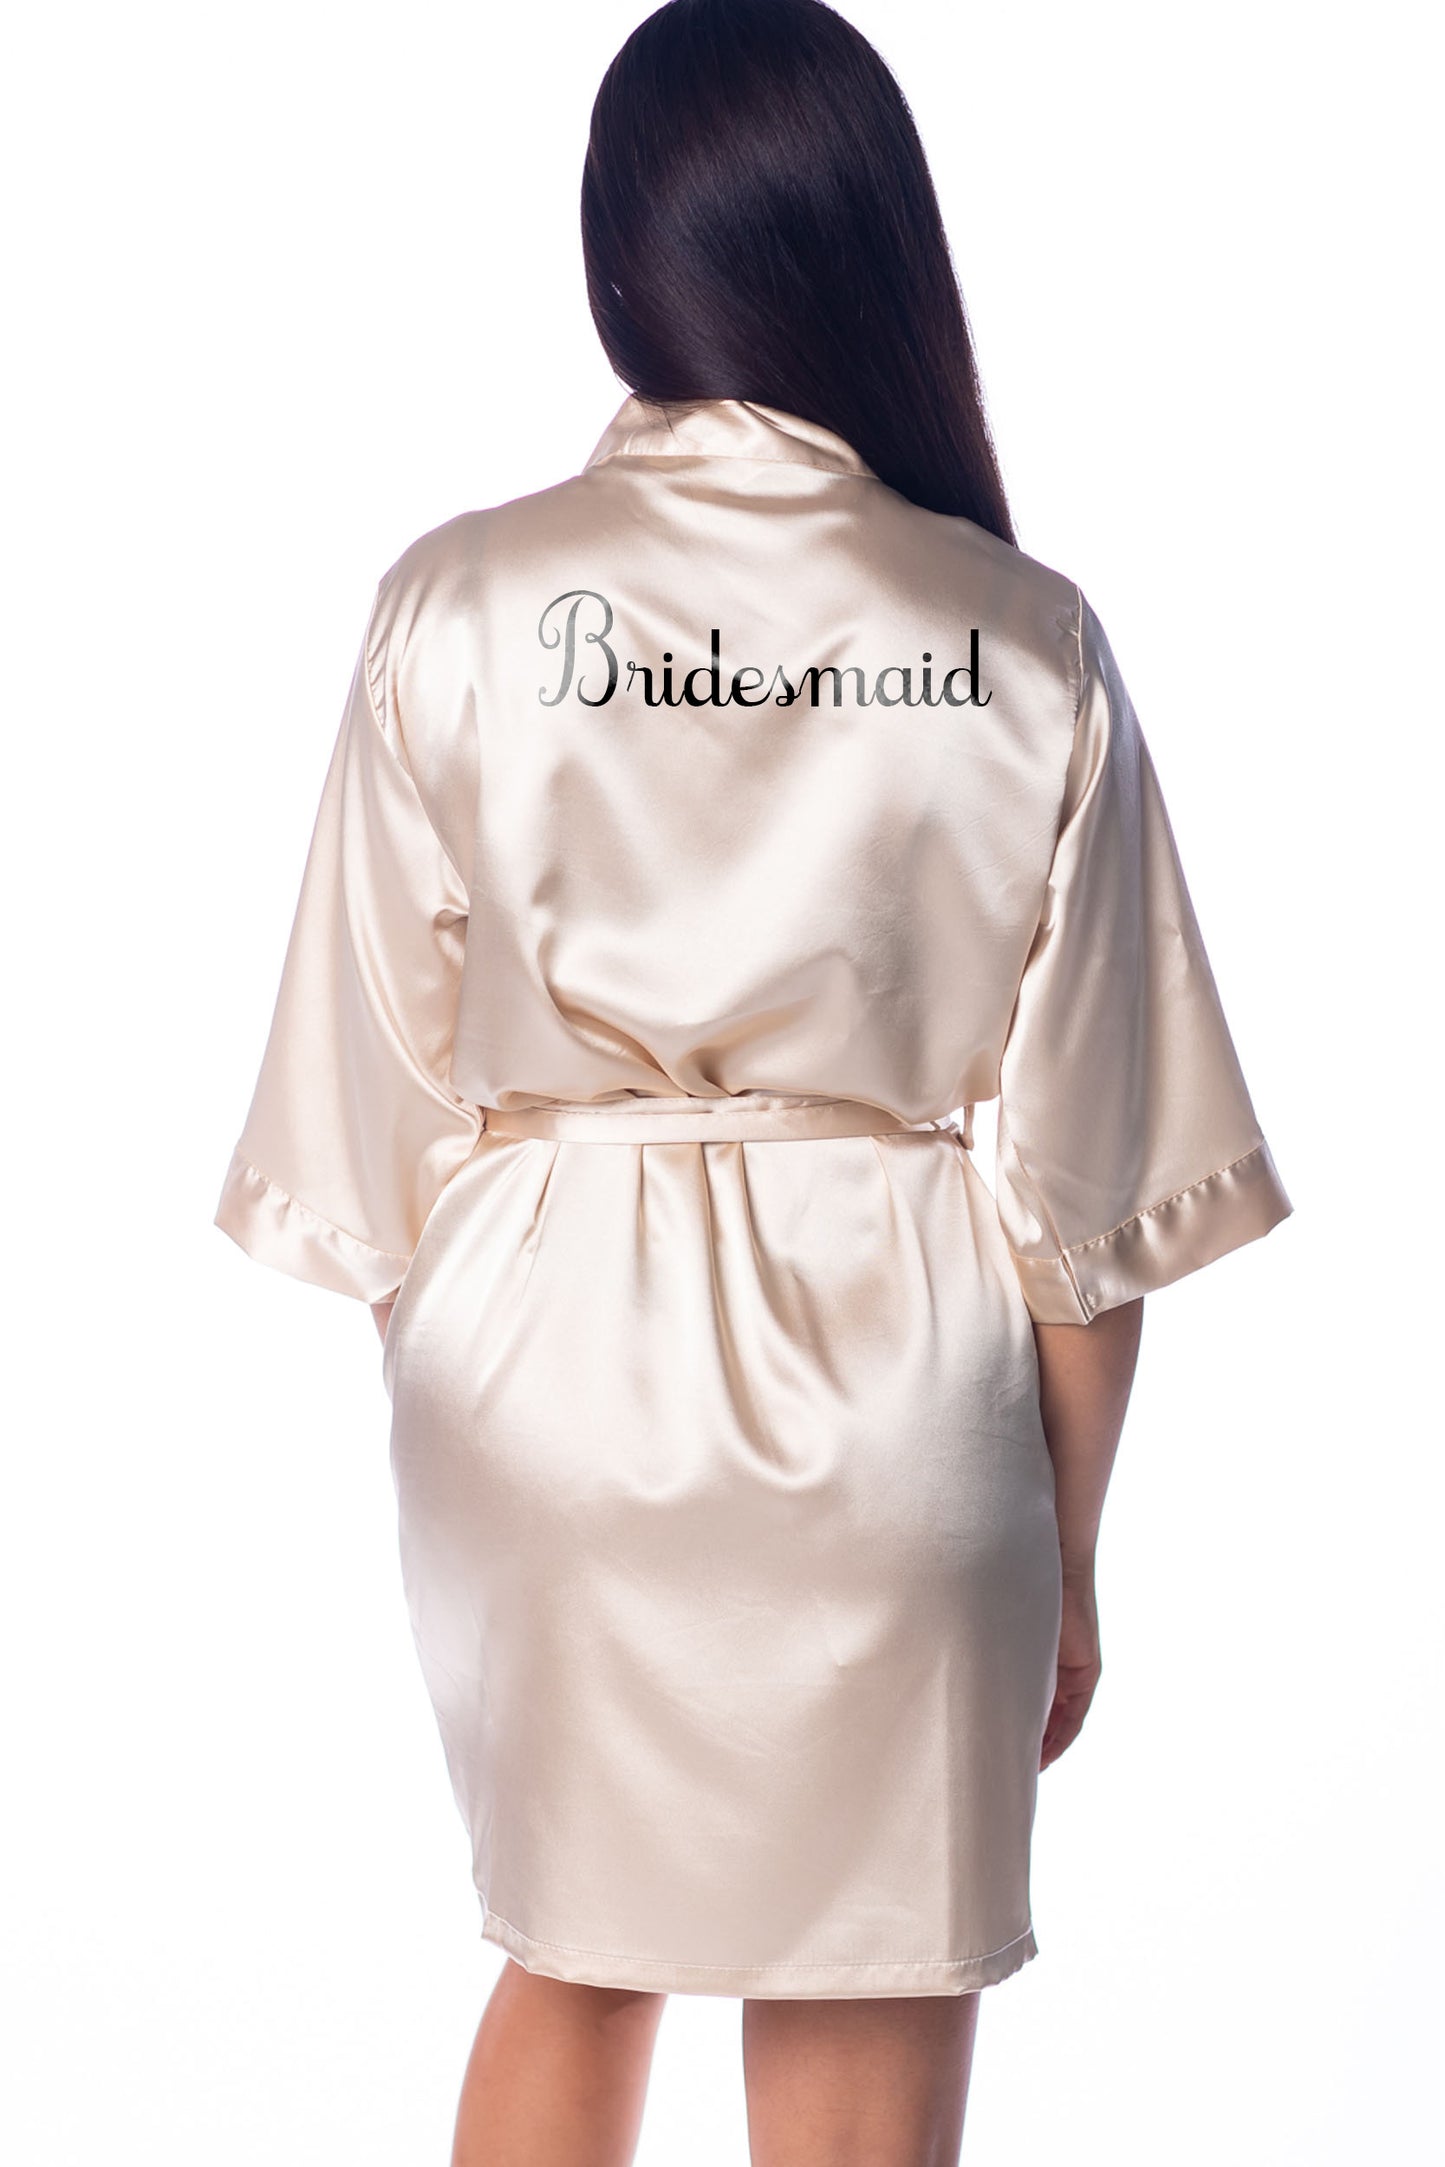 S/M "Bridesmaid" Champagne Satin Robe - Cursif in Black (Clearance Item)